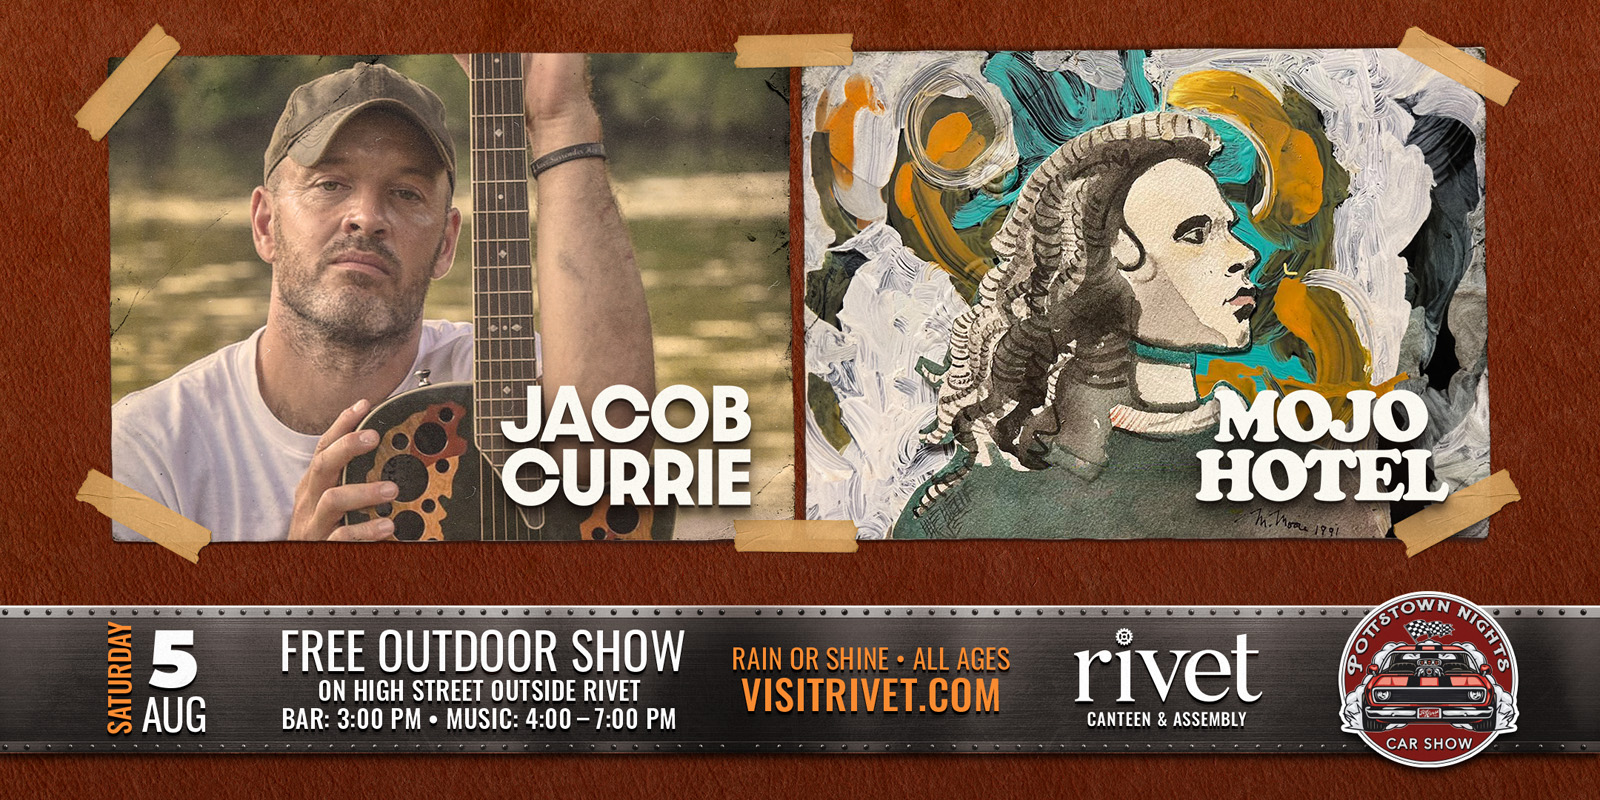 Mojo Hotel and Jacob Currie performing live at Rivet at the FREE outdoor Pottstown Nights Car Show on Saturday, August 5th, 2023. The bar opens at 3PM and music starts at 4PM until 7PM. Be there!